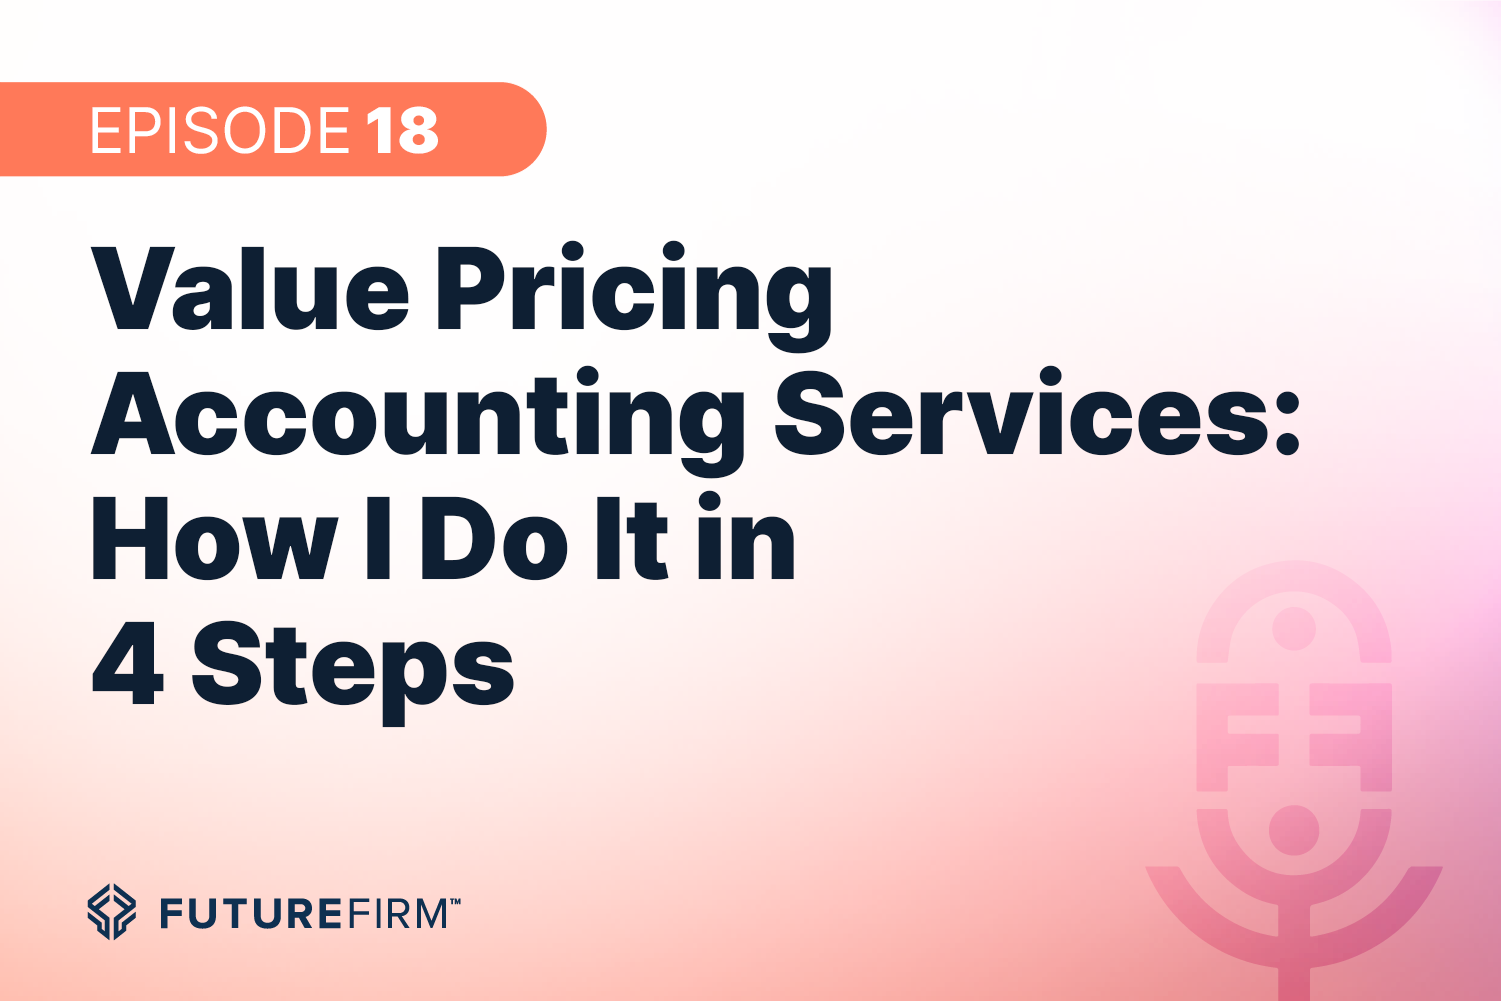 Value Pricing Accounting Services: How I Do It in 4 Steps